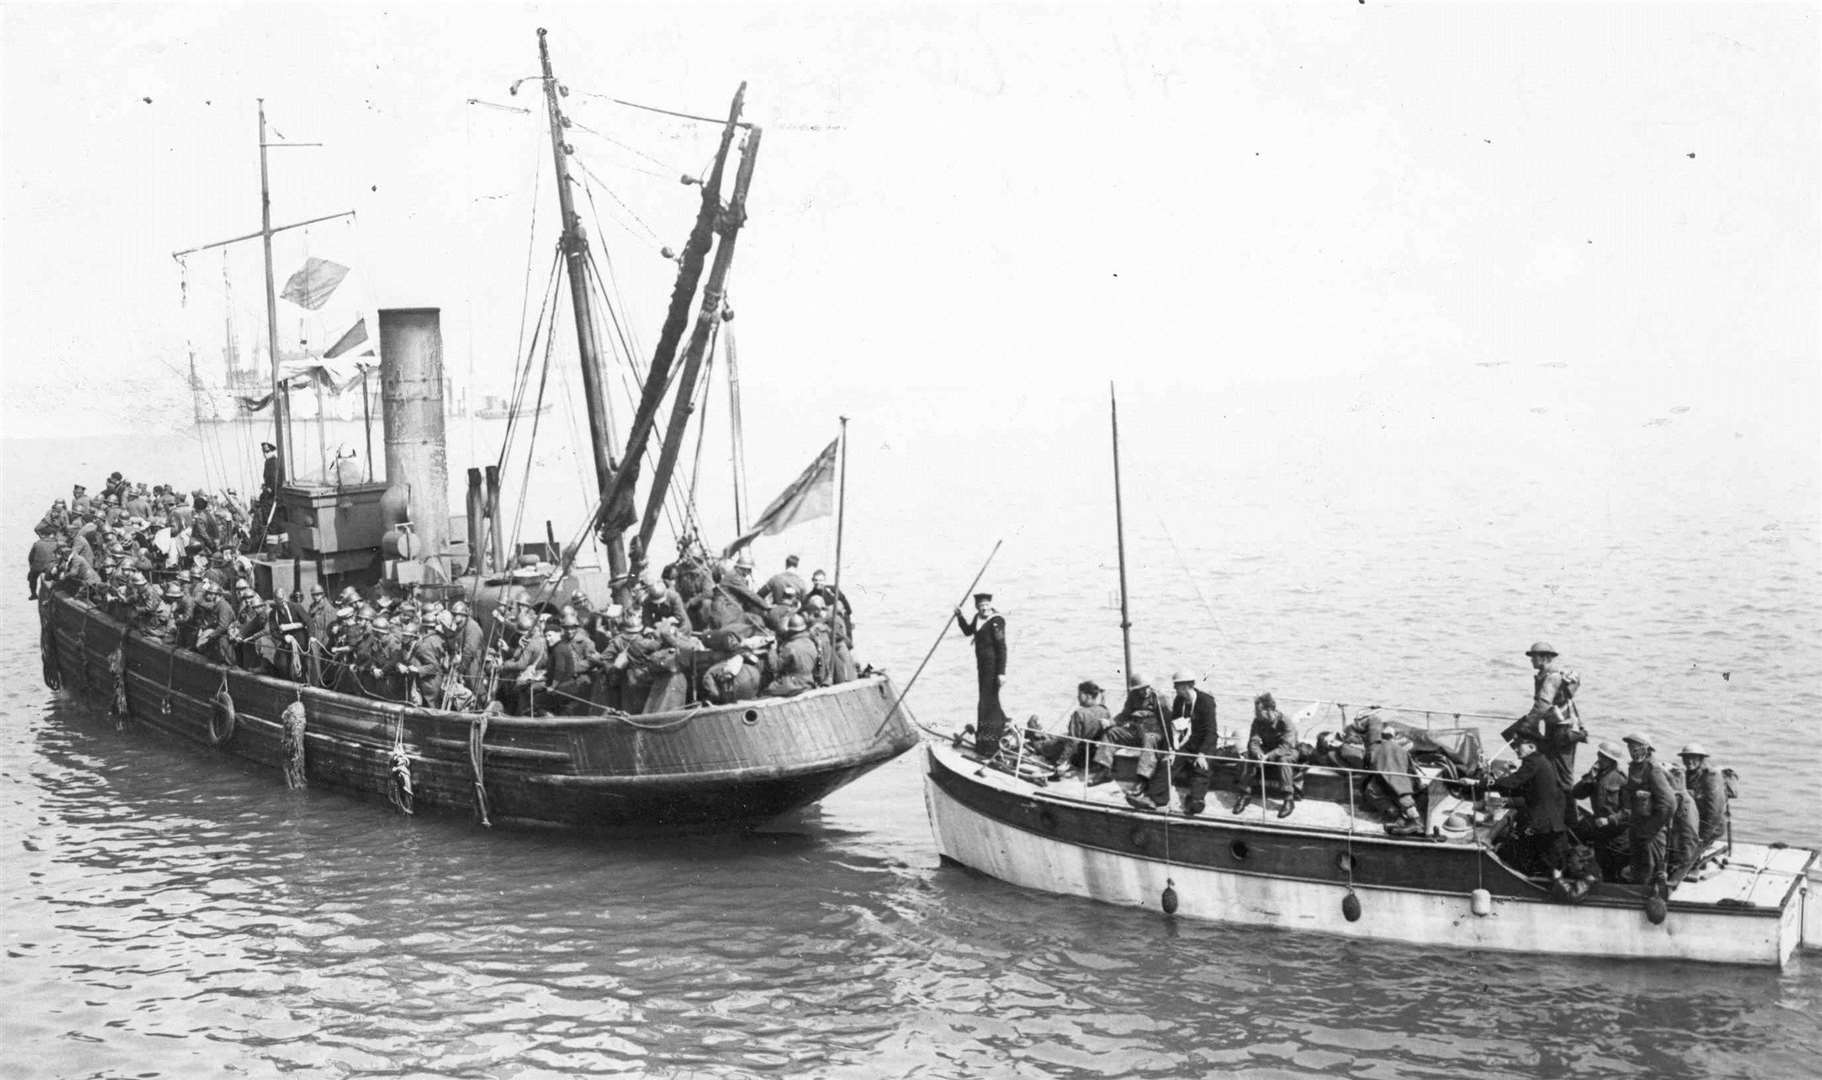 The British Expeditionary Forces arriving in small boats from Dunkirk. Picture dated May, 1942